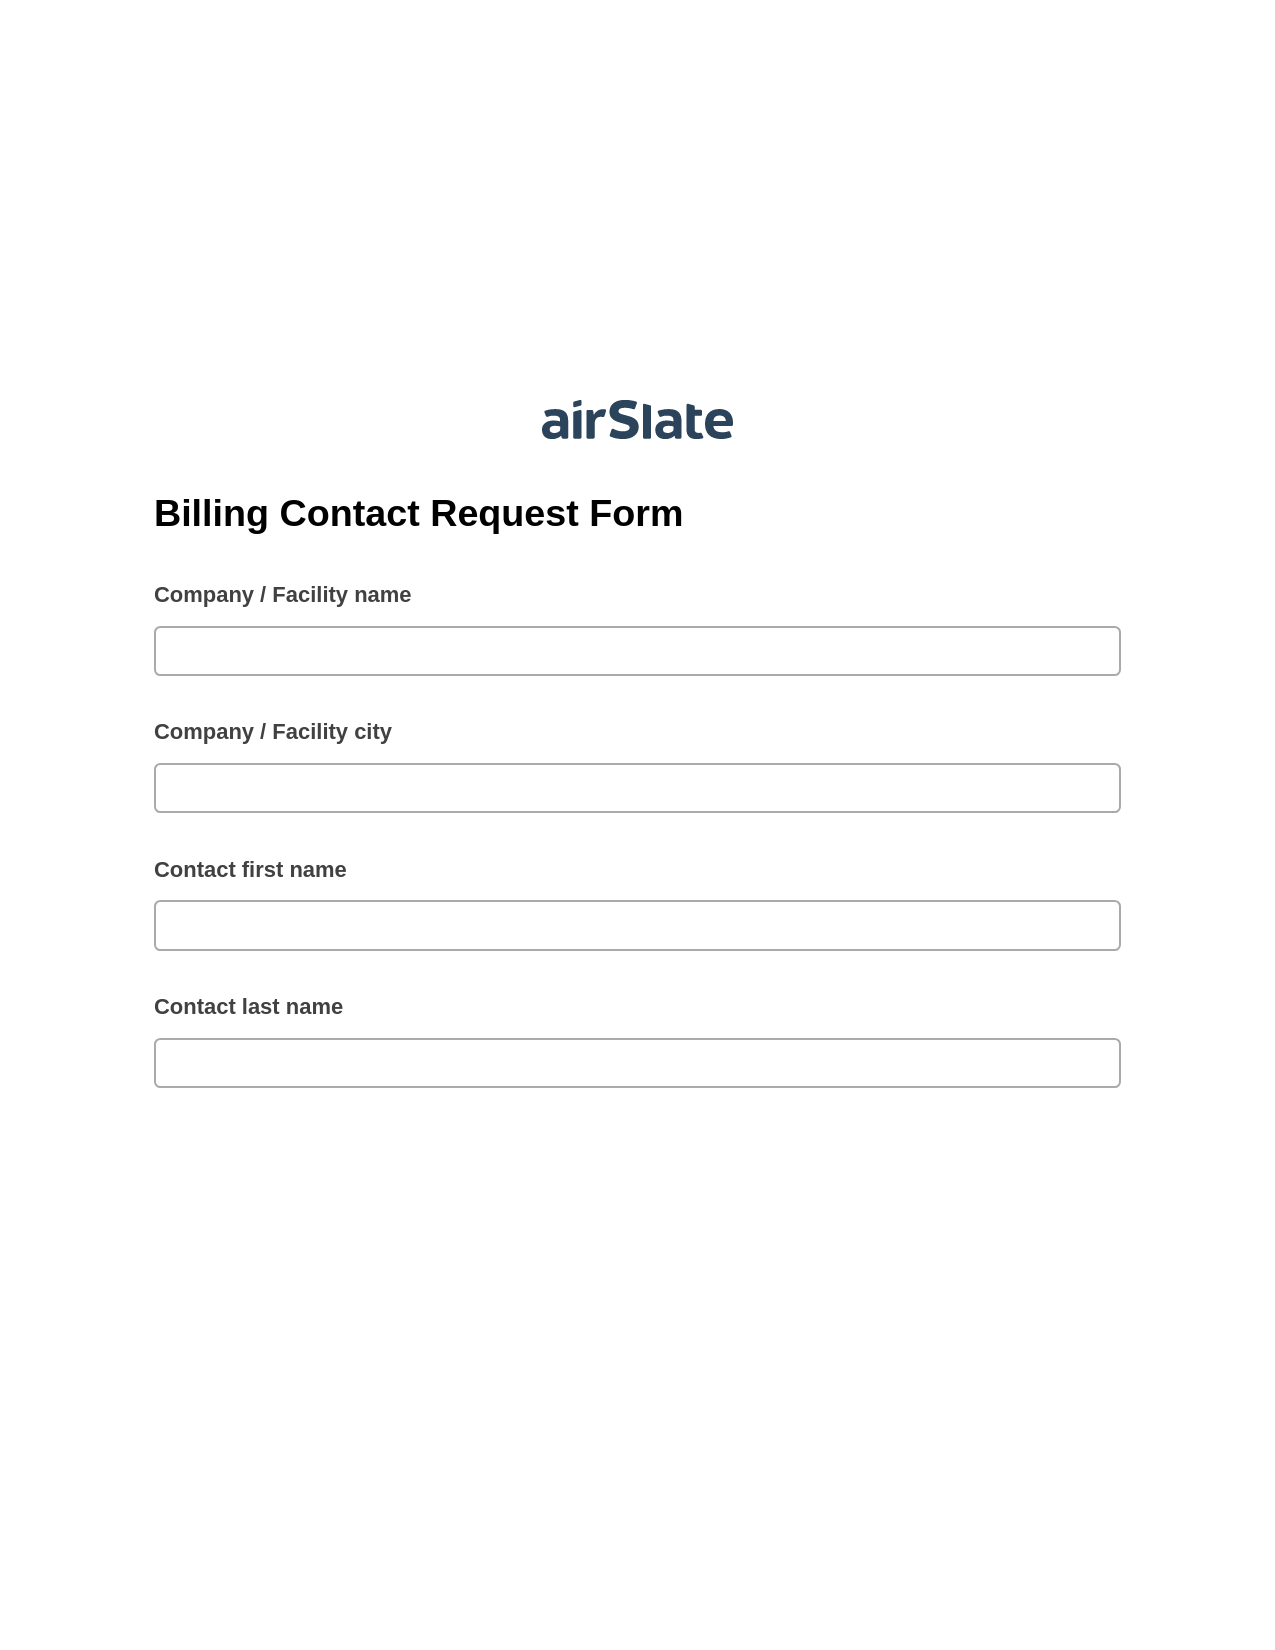 Multirole Billing Contact Request Form Pre-fill from Salesforce Record Bot, Export to MS Dynamics 365 Bot, Export to Salesforce Bot